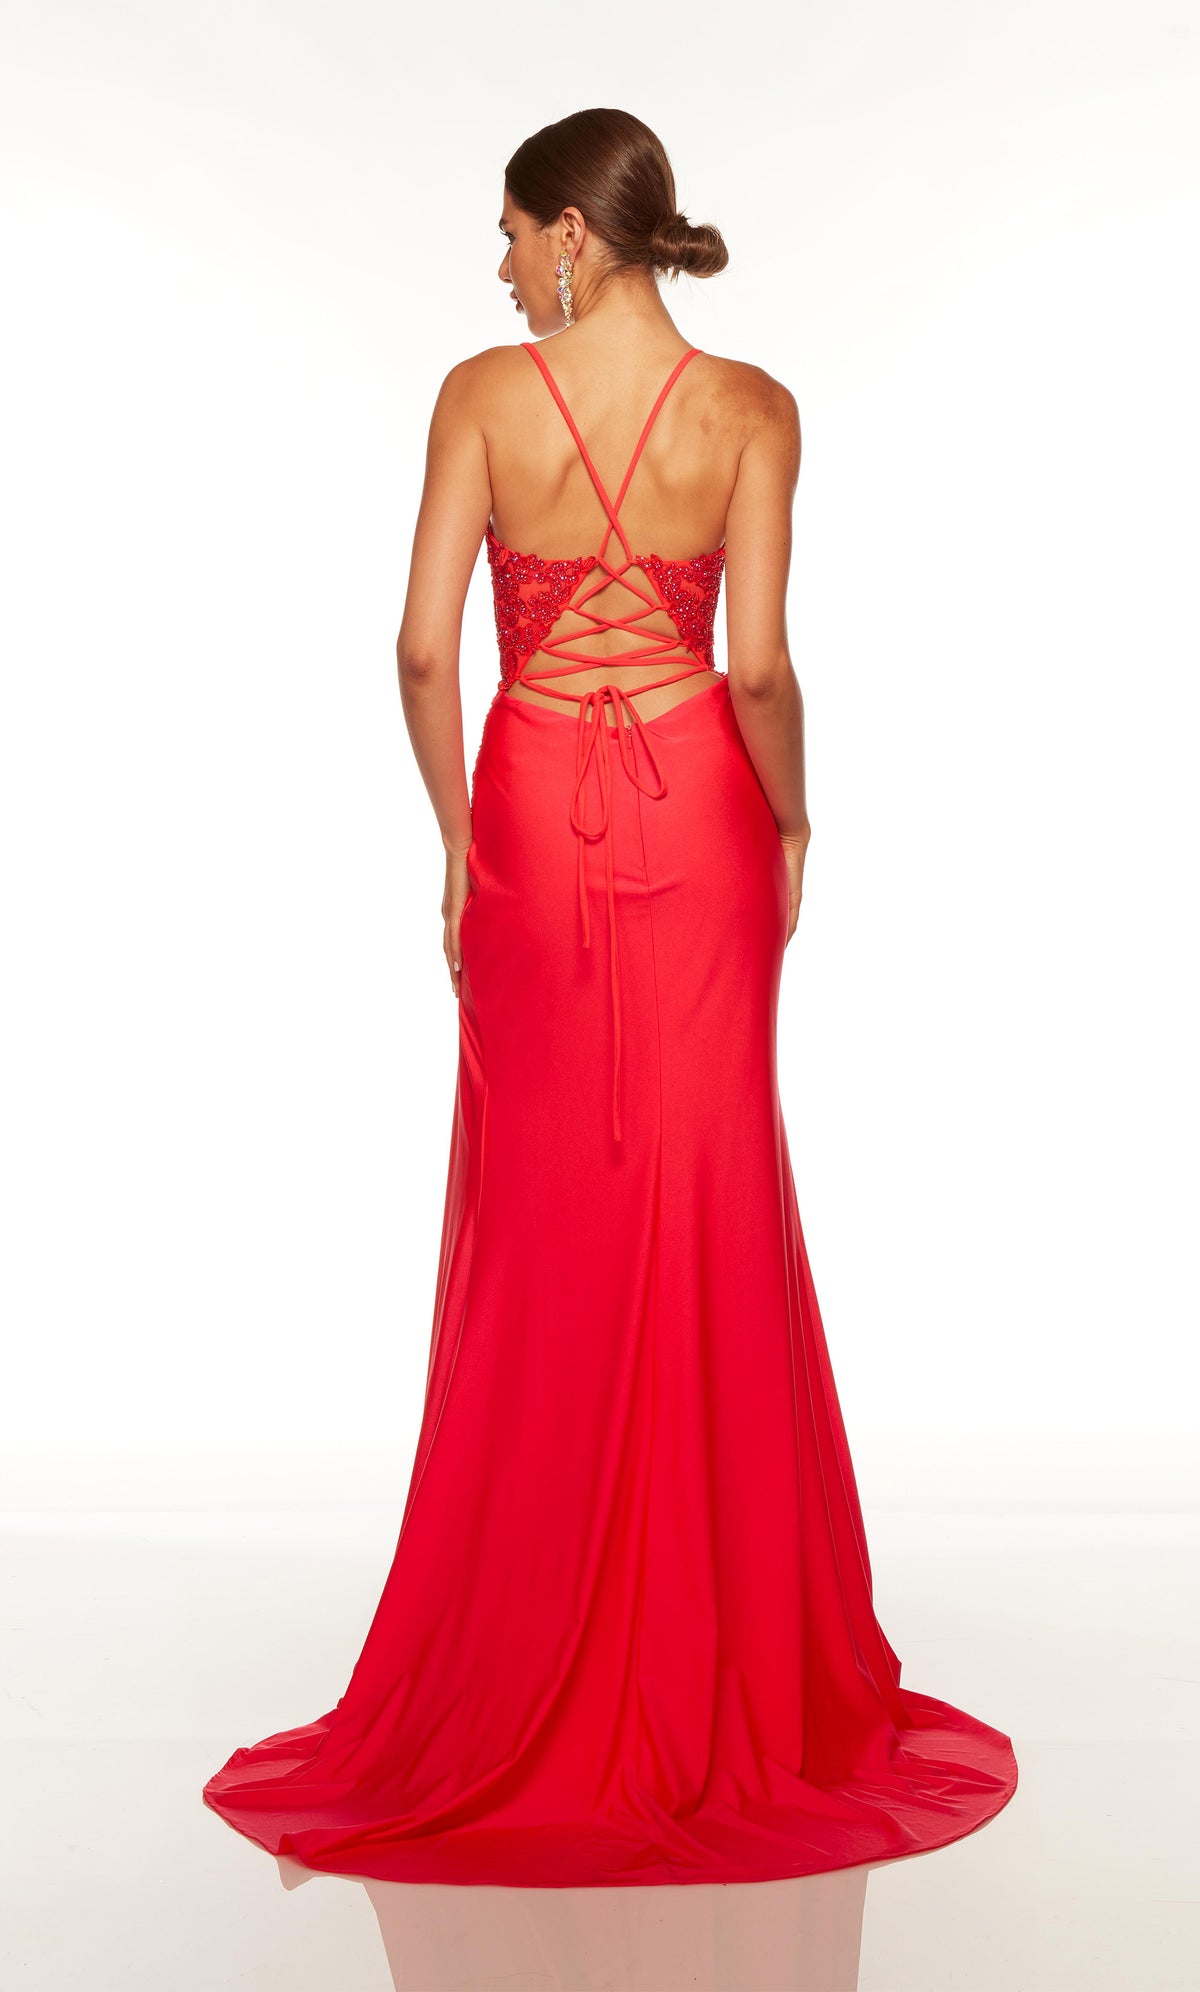 Red corset gown with a lace up back and train.